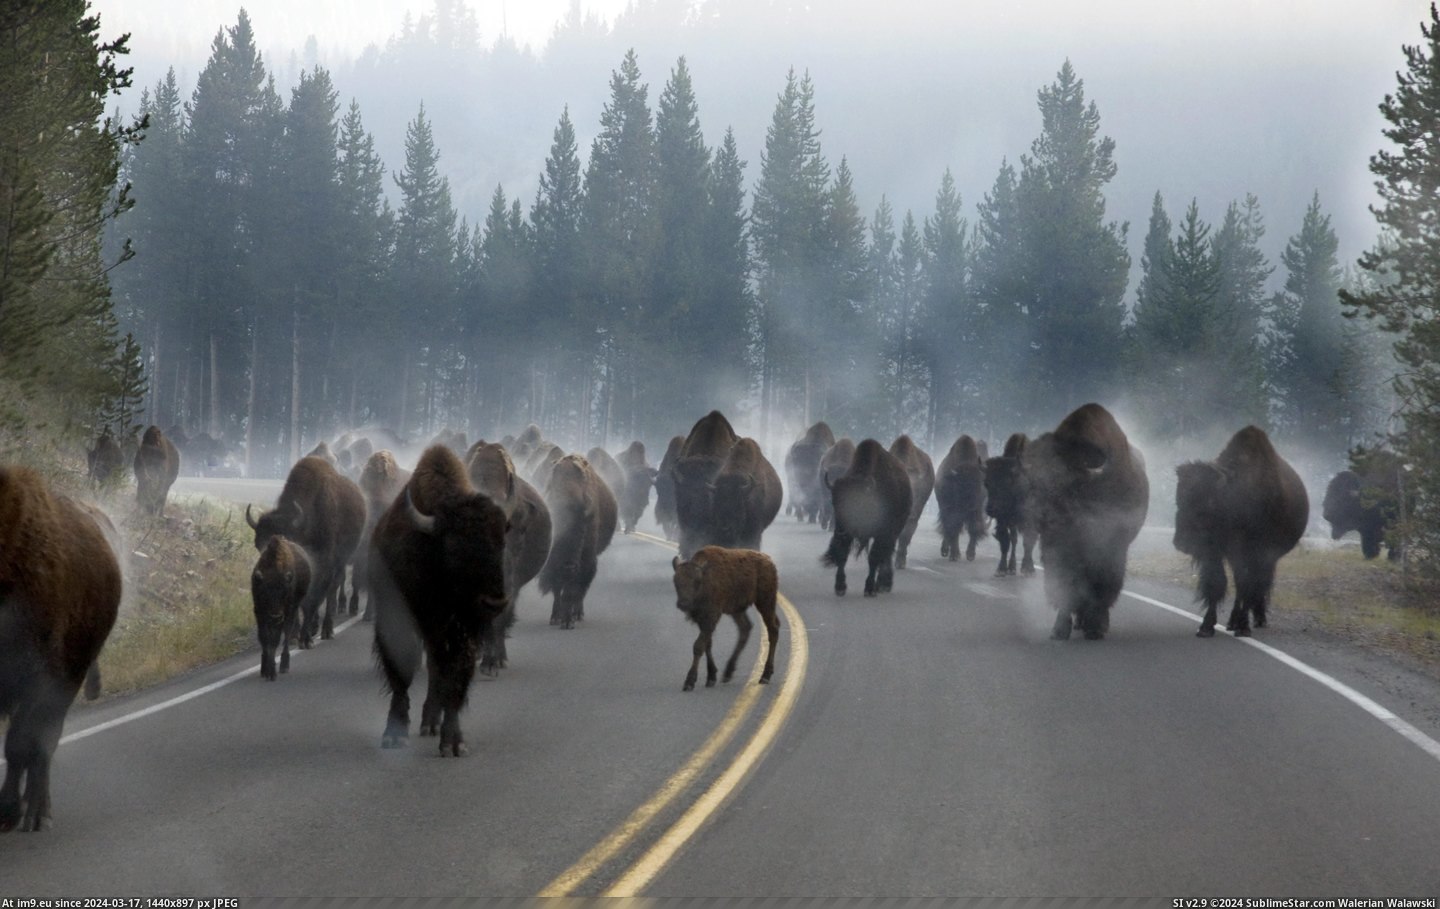 #Park #National #Traffic #Yellowstone #Rush #Morning #Hour [Pics] Morning rush hour traffic in Yellowstone National Park Pic. (Image of album My r/PICS favs))